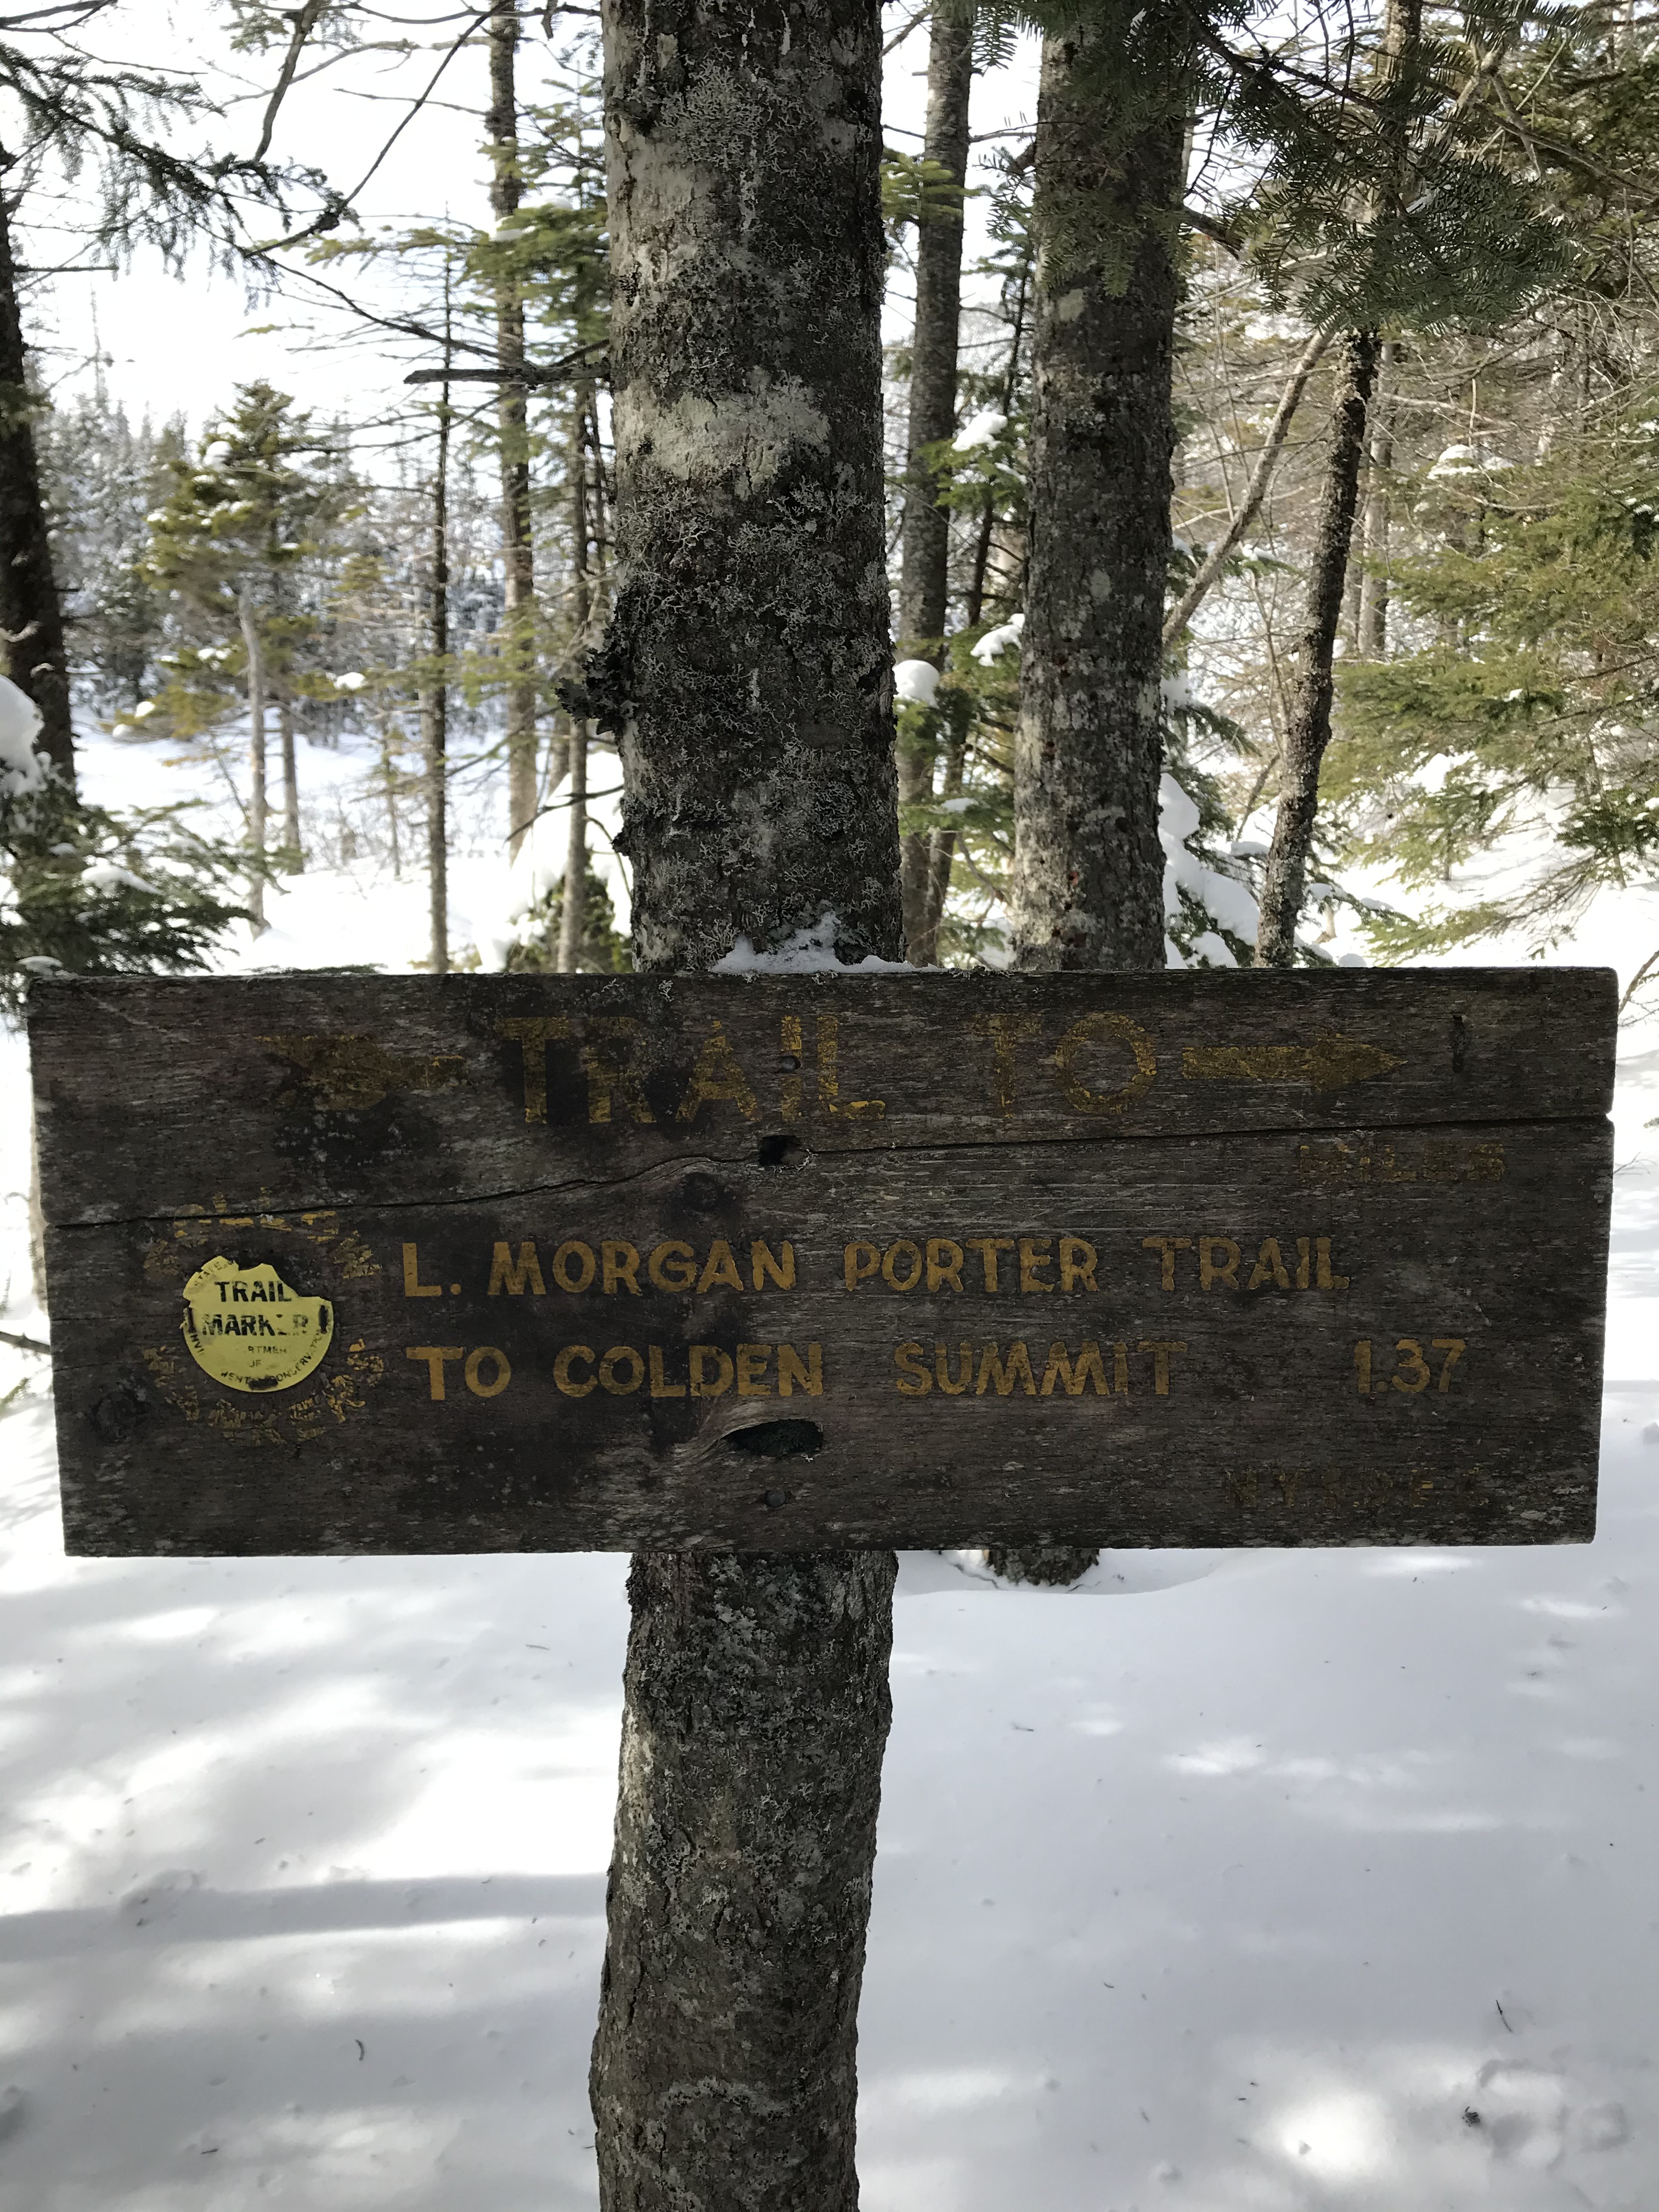 Sign: Morgan Porter trail to colden summit